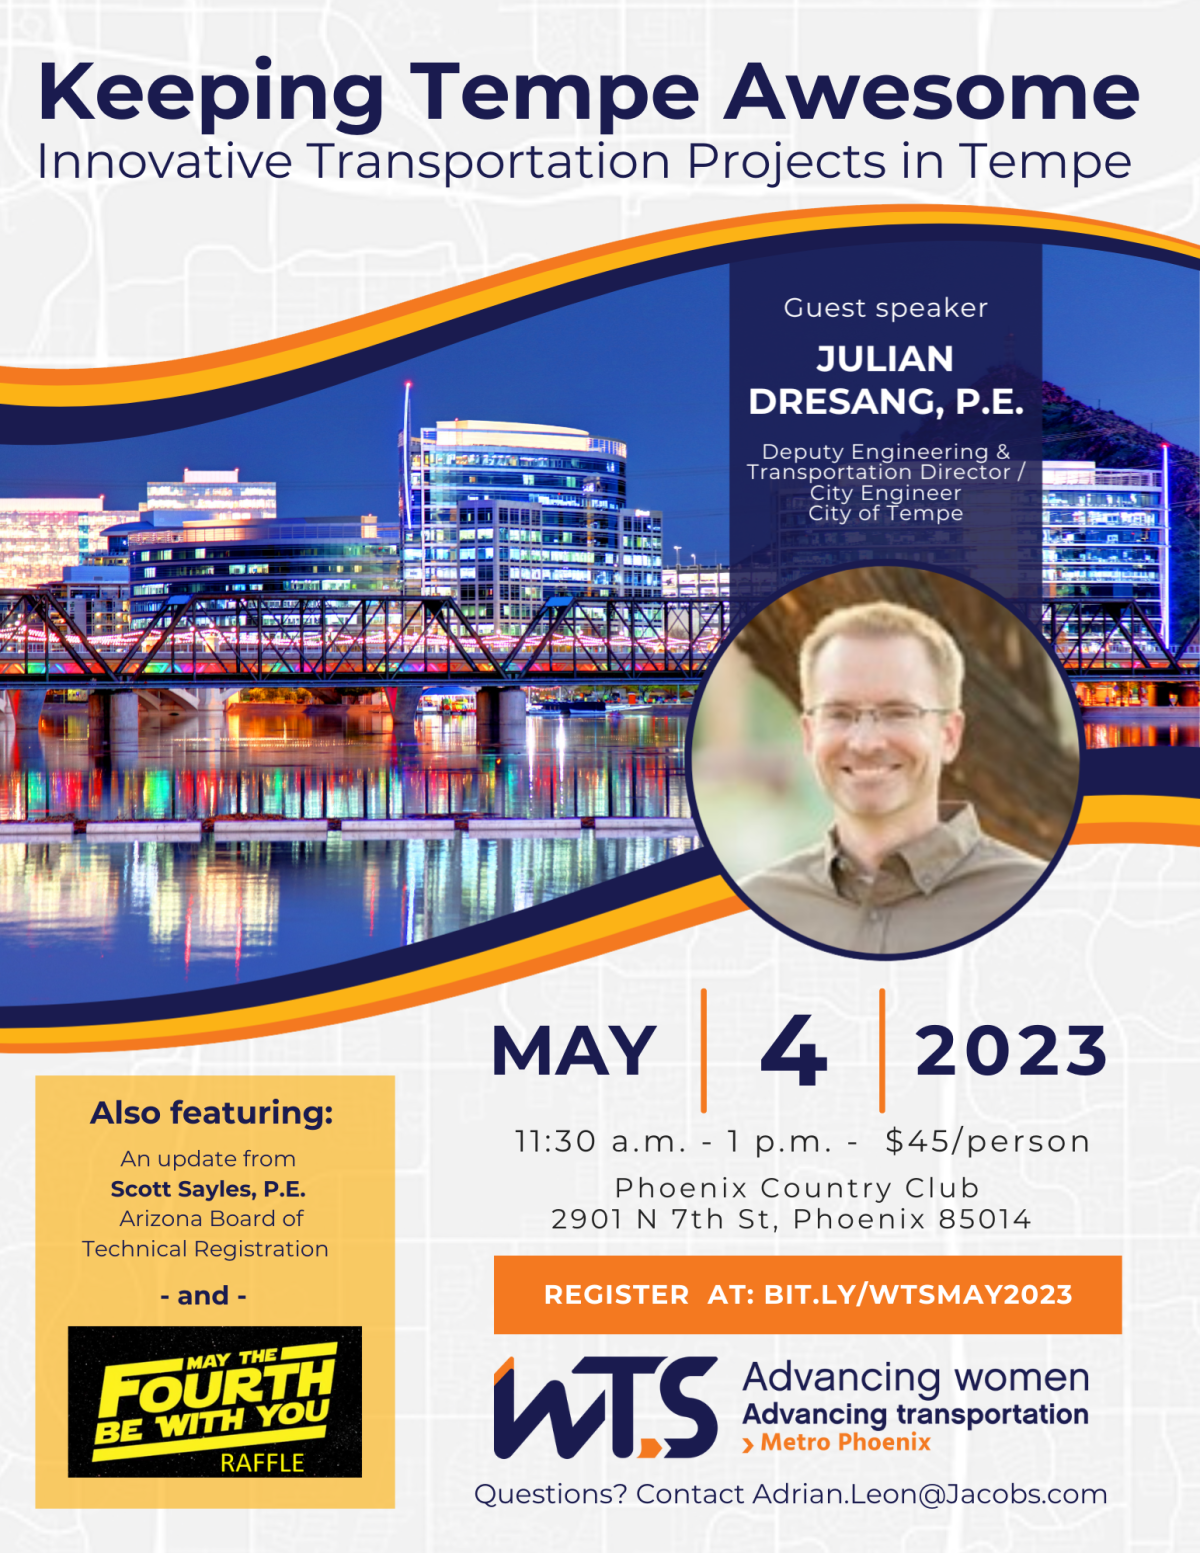 Join us on May 4th at 11:30 a.m. at the Phoenix Country Club for Keeping Tempe Awesome Luncheon to learn about innovative transportation projects in Tempe from Julian Dresang, City Engineer. Click on the flyer to register for the event.